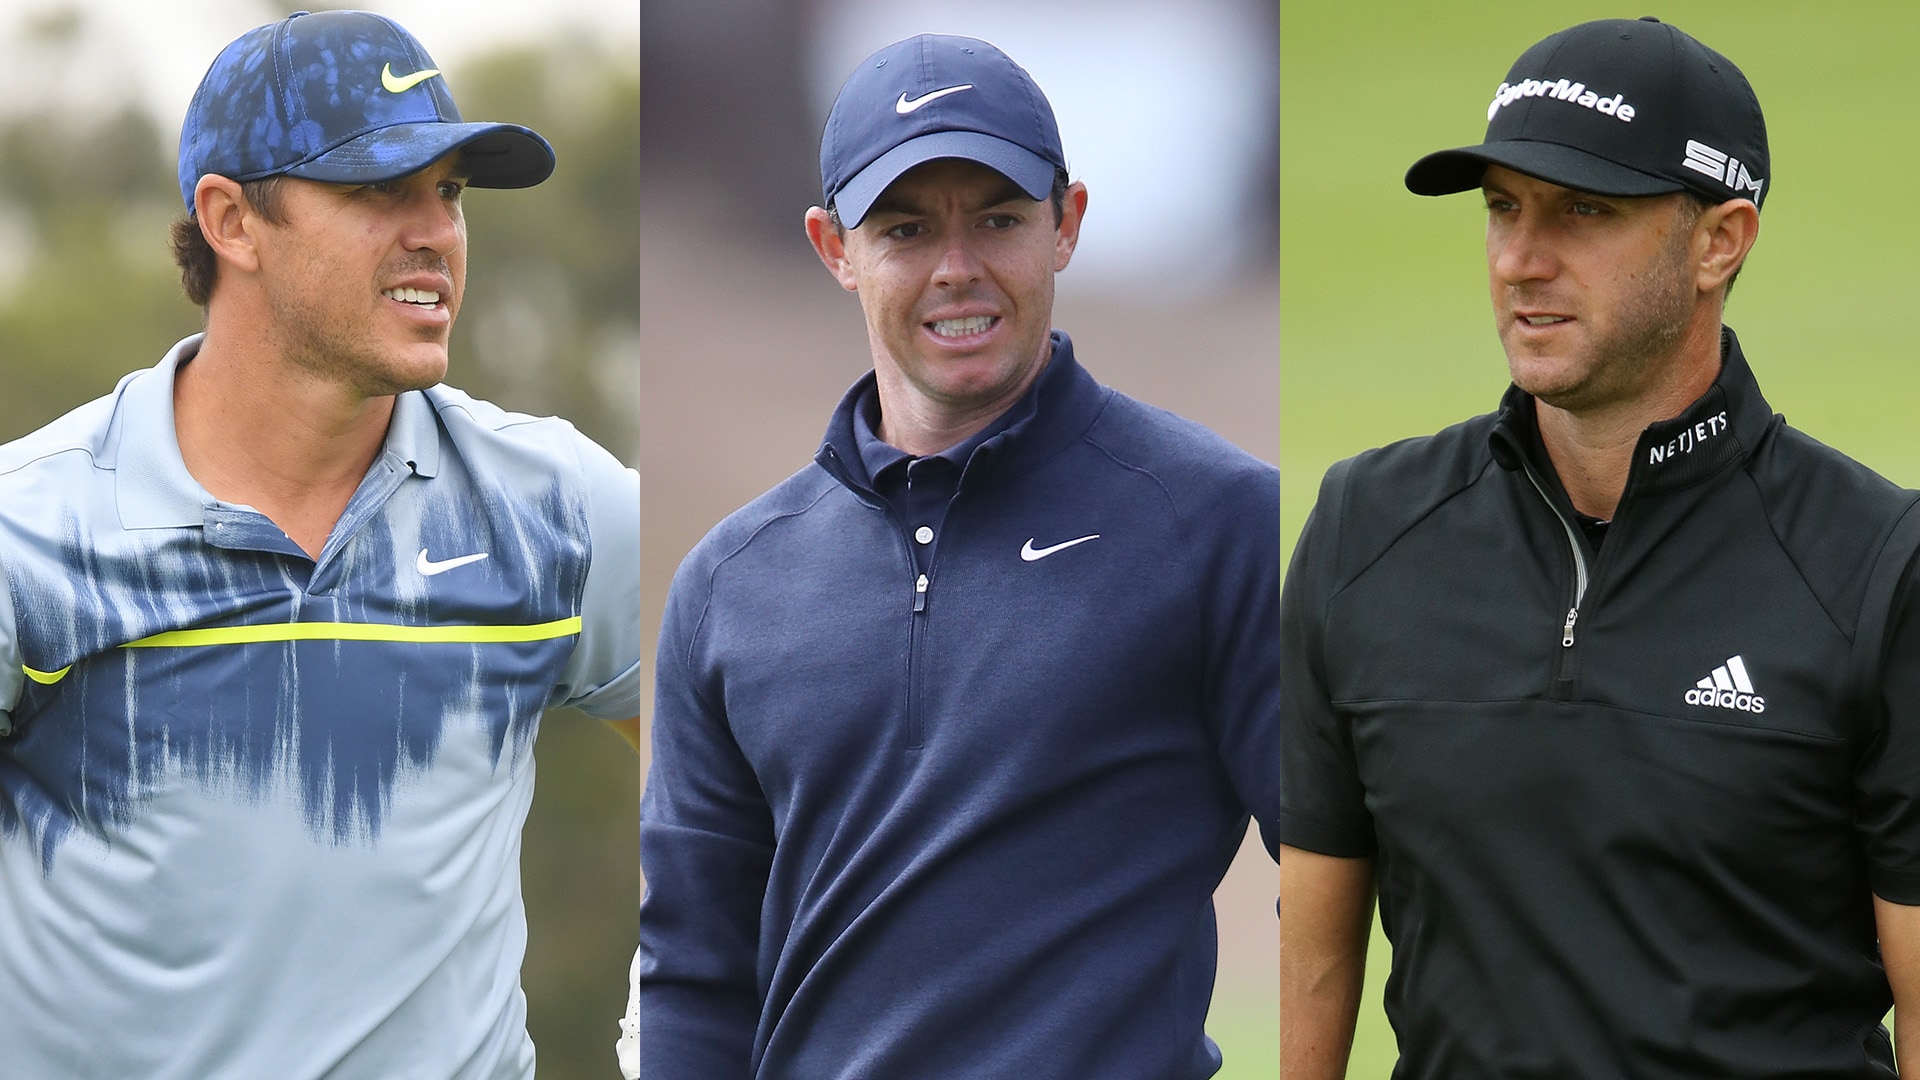 Rory McIlroy points out that Dustin Johnson has 3 times as many wins as Brooks Koepka